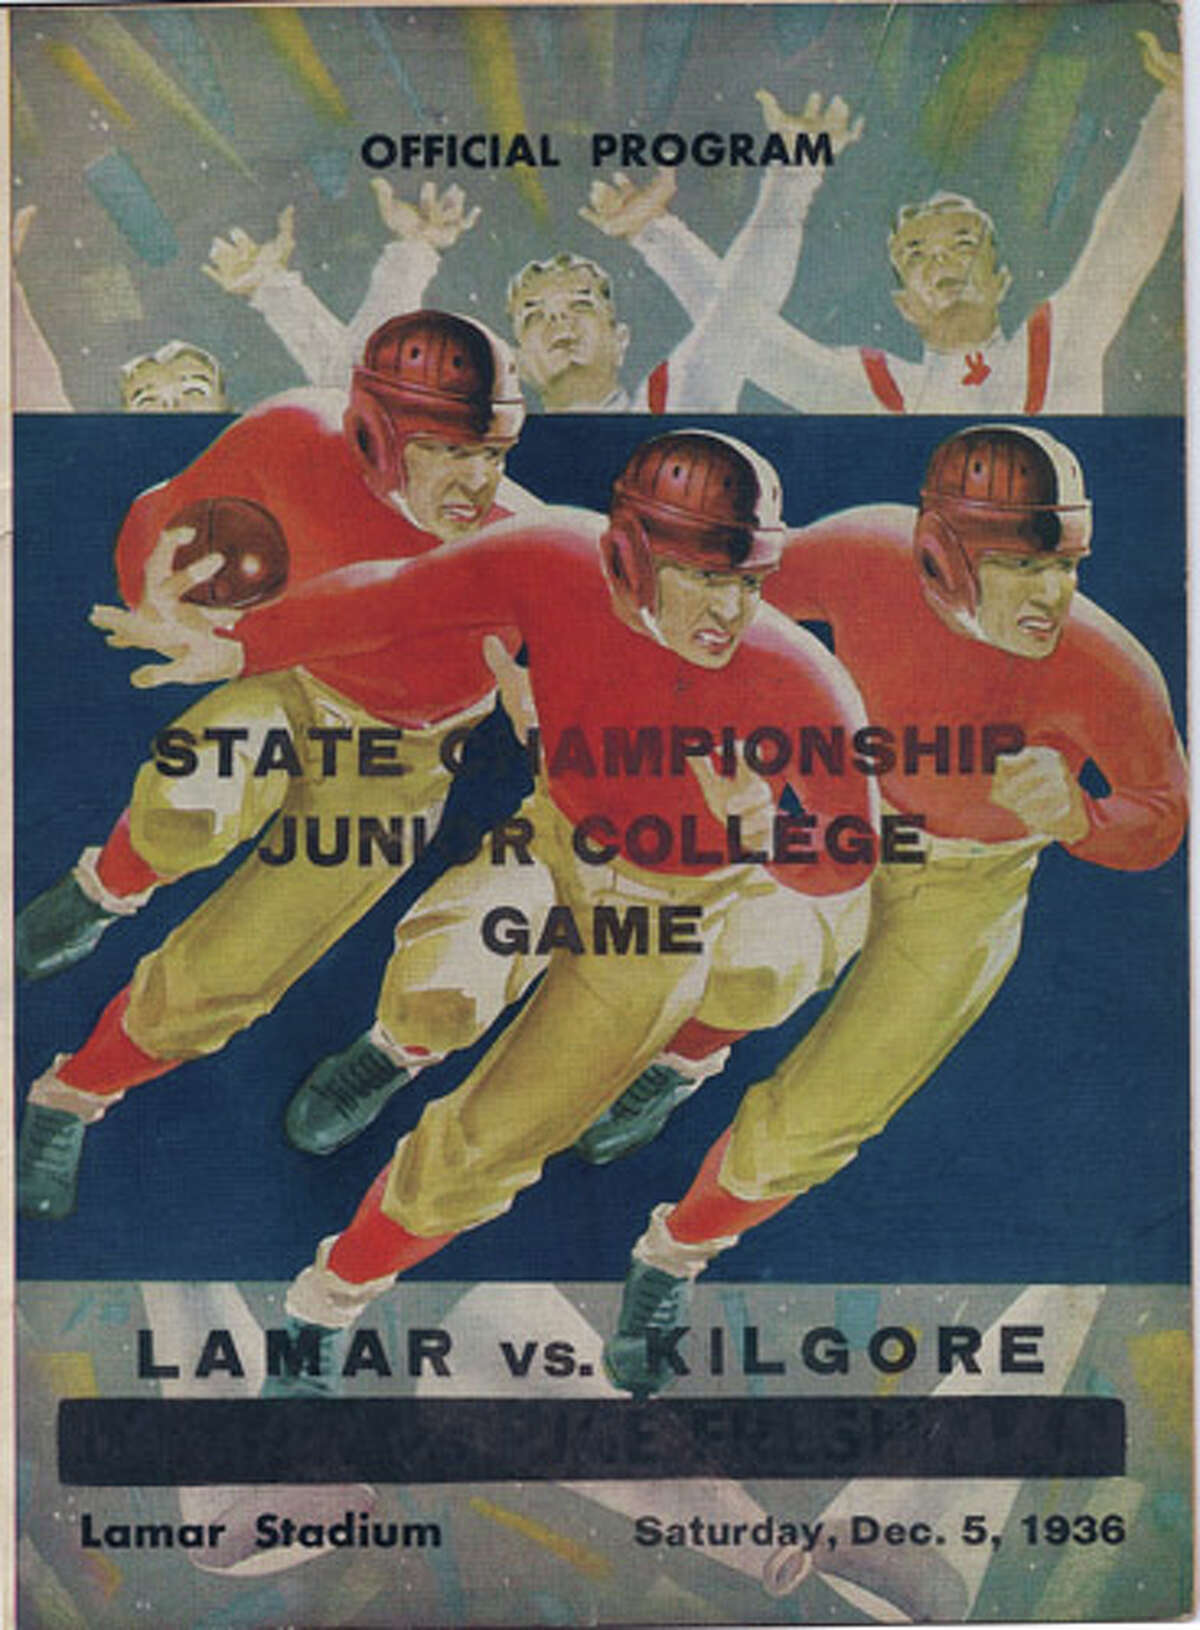 This is a copy of the official football program for the 1936 State Championship Junior College Game between Lamar and Kilgore. Photo courtesy of the Lamar University archives